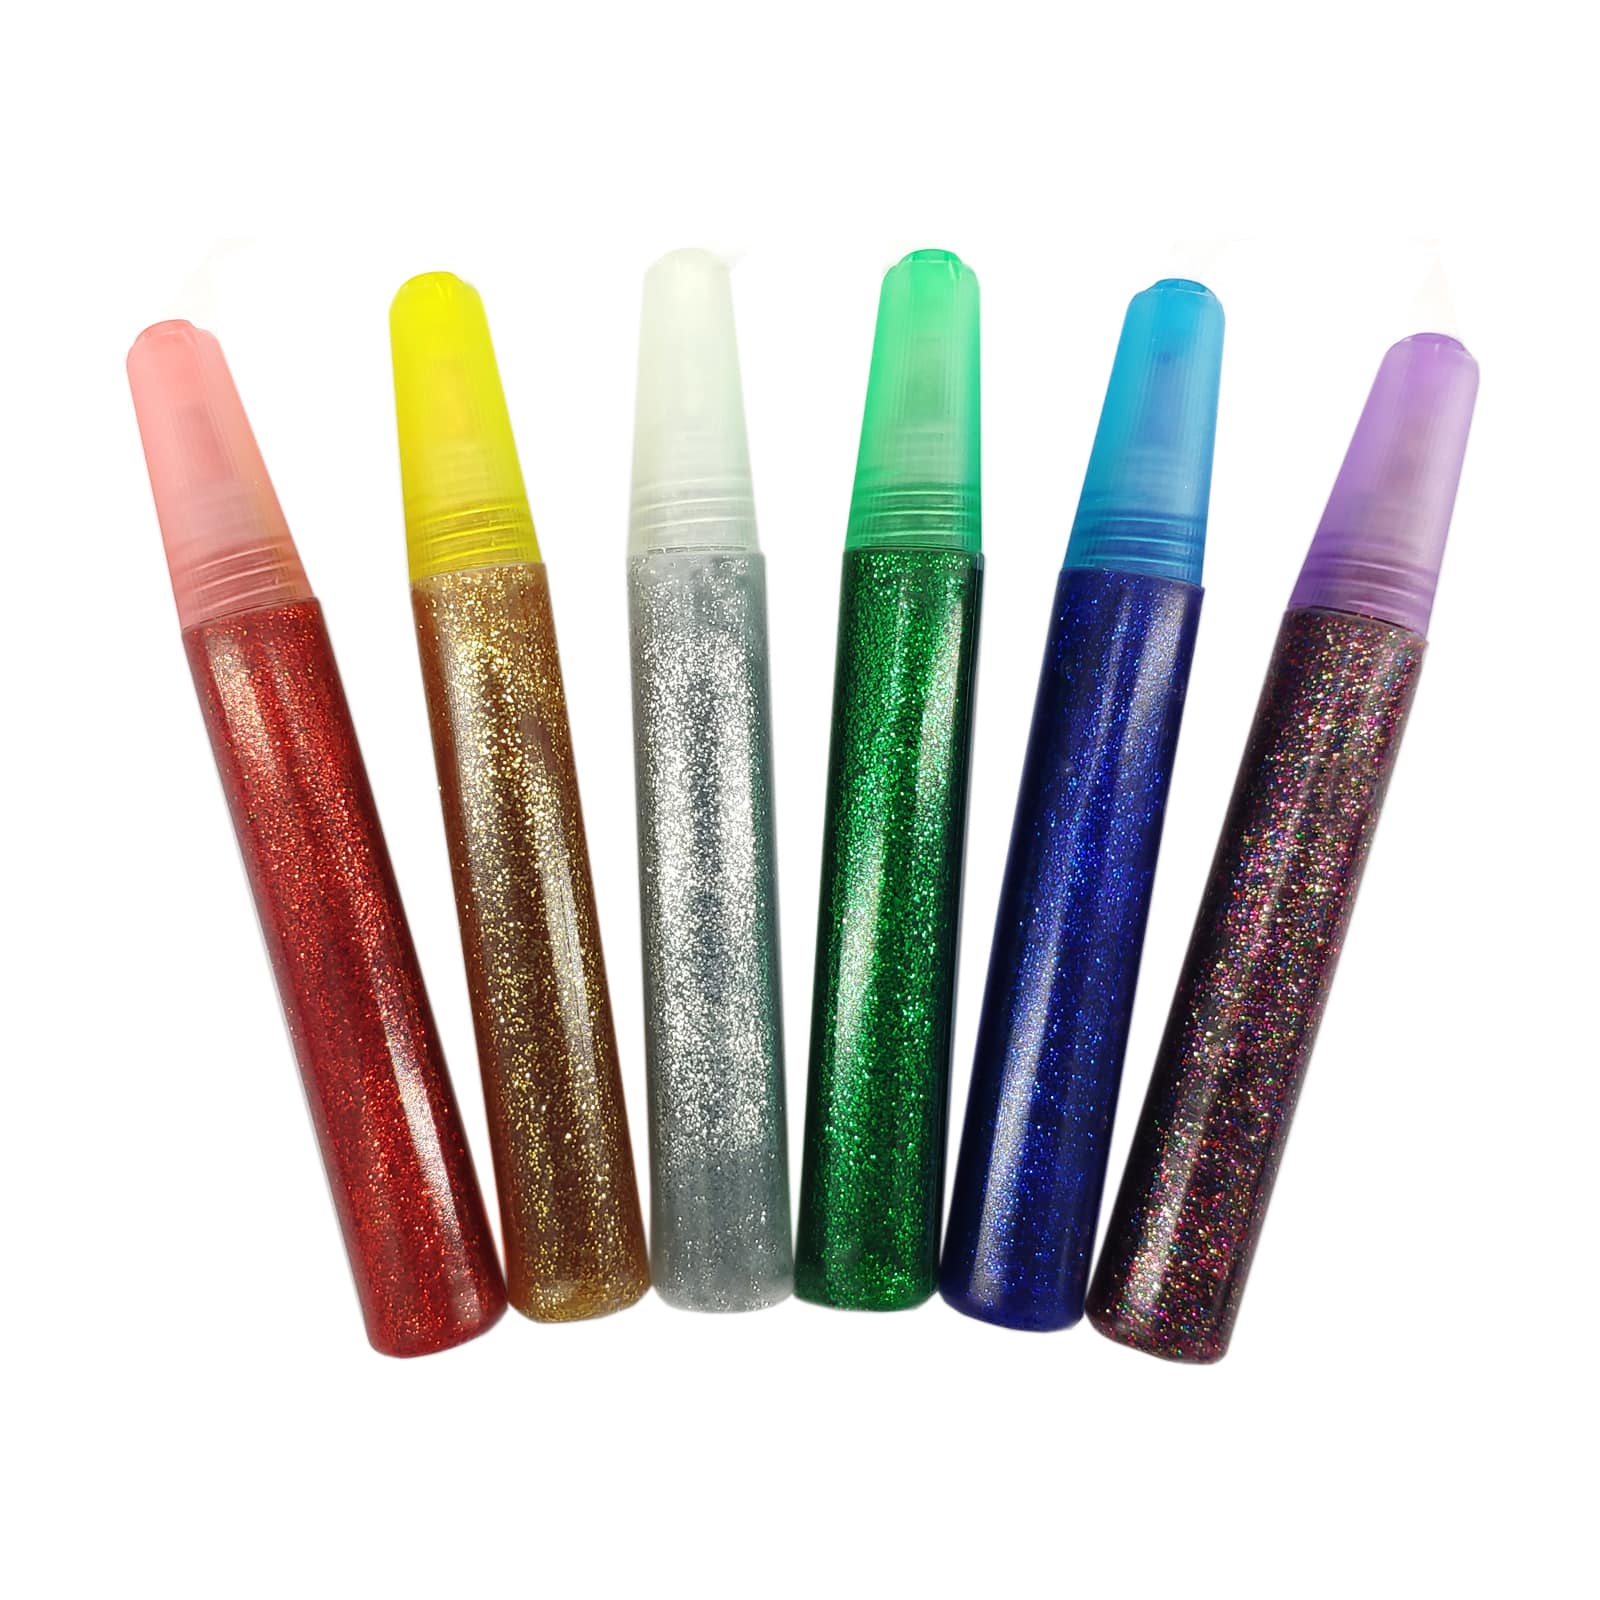 Crayola Glitter Markers 6pc (case of 24)